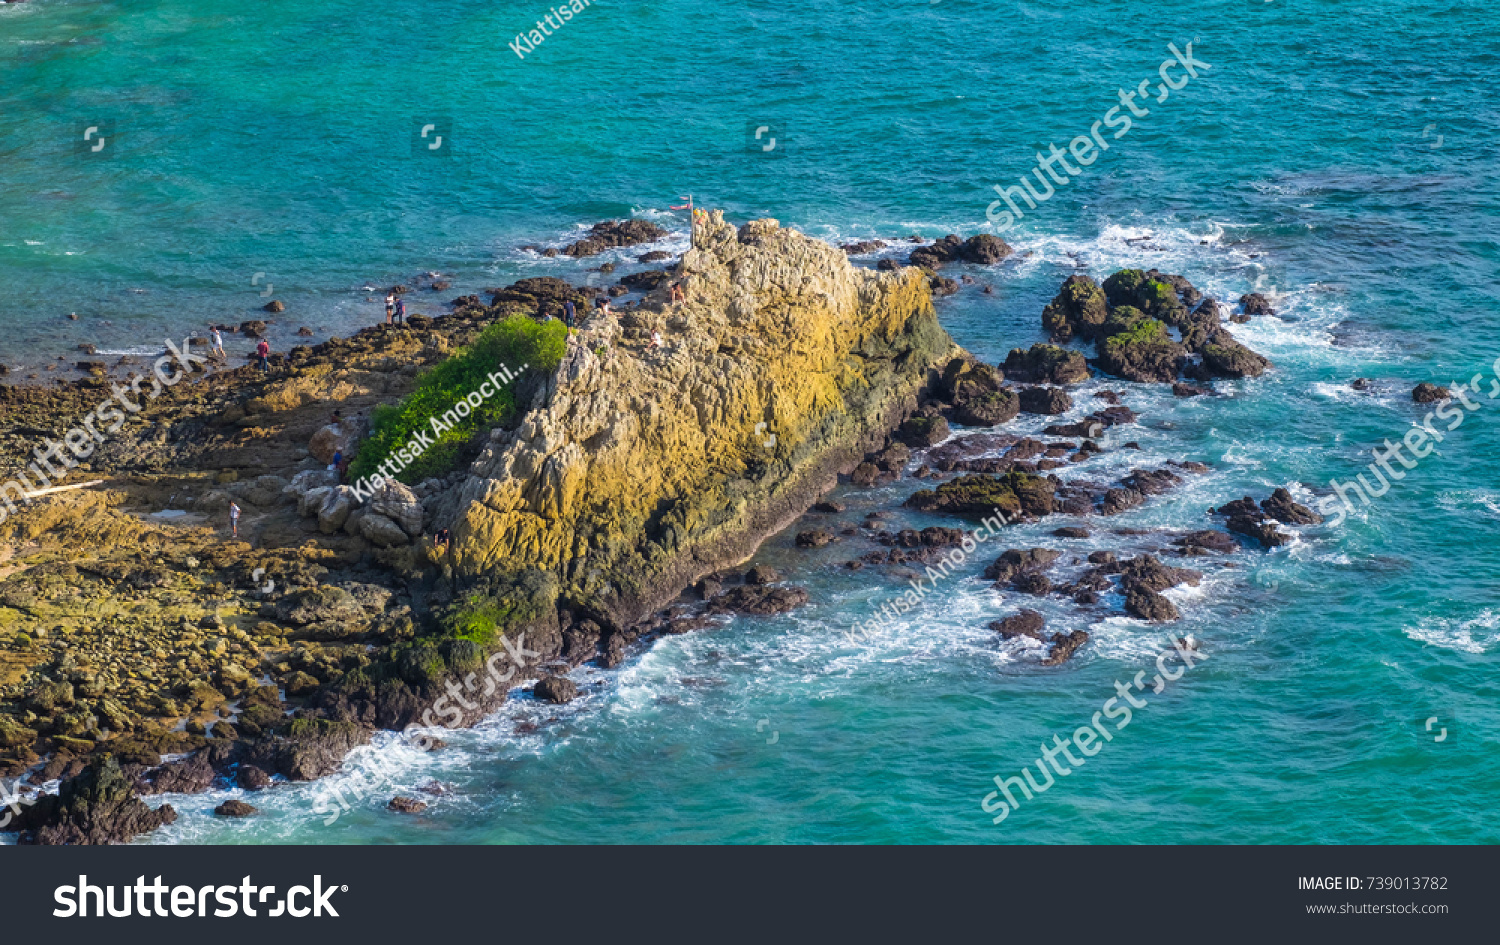 Huge Stone and Turquoise Color of Sea with waves from wind, Phuket, Thaialnd.  #739013782